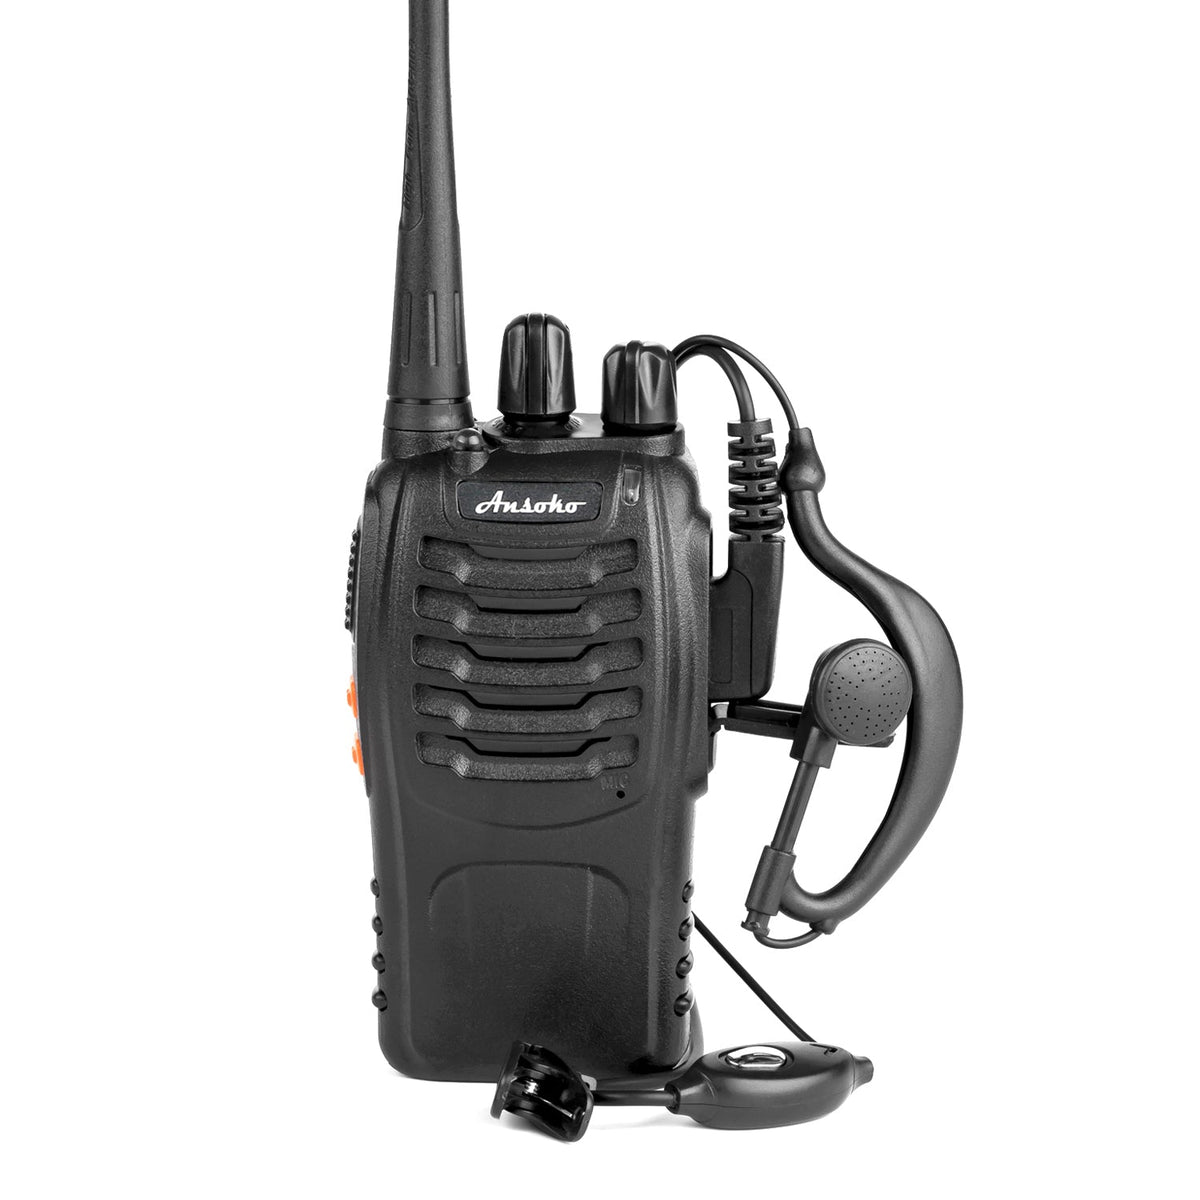 Arcshell Rechargeable Long Range Two-Way Radios with Earpiece Pack Walkie Talkies Li-ion Battery and Charger Included - 4